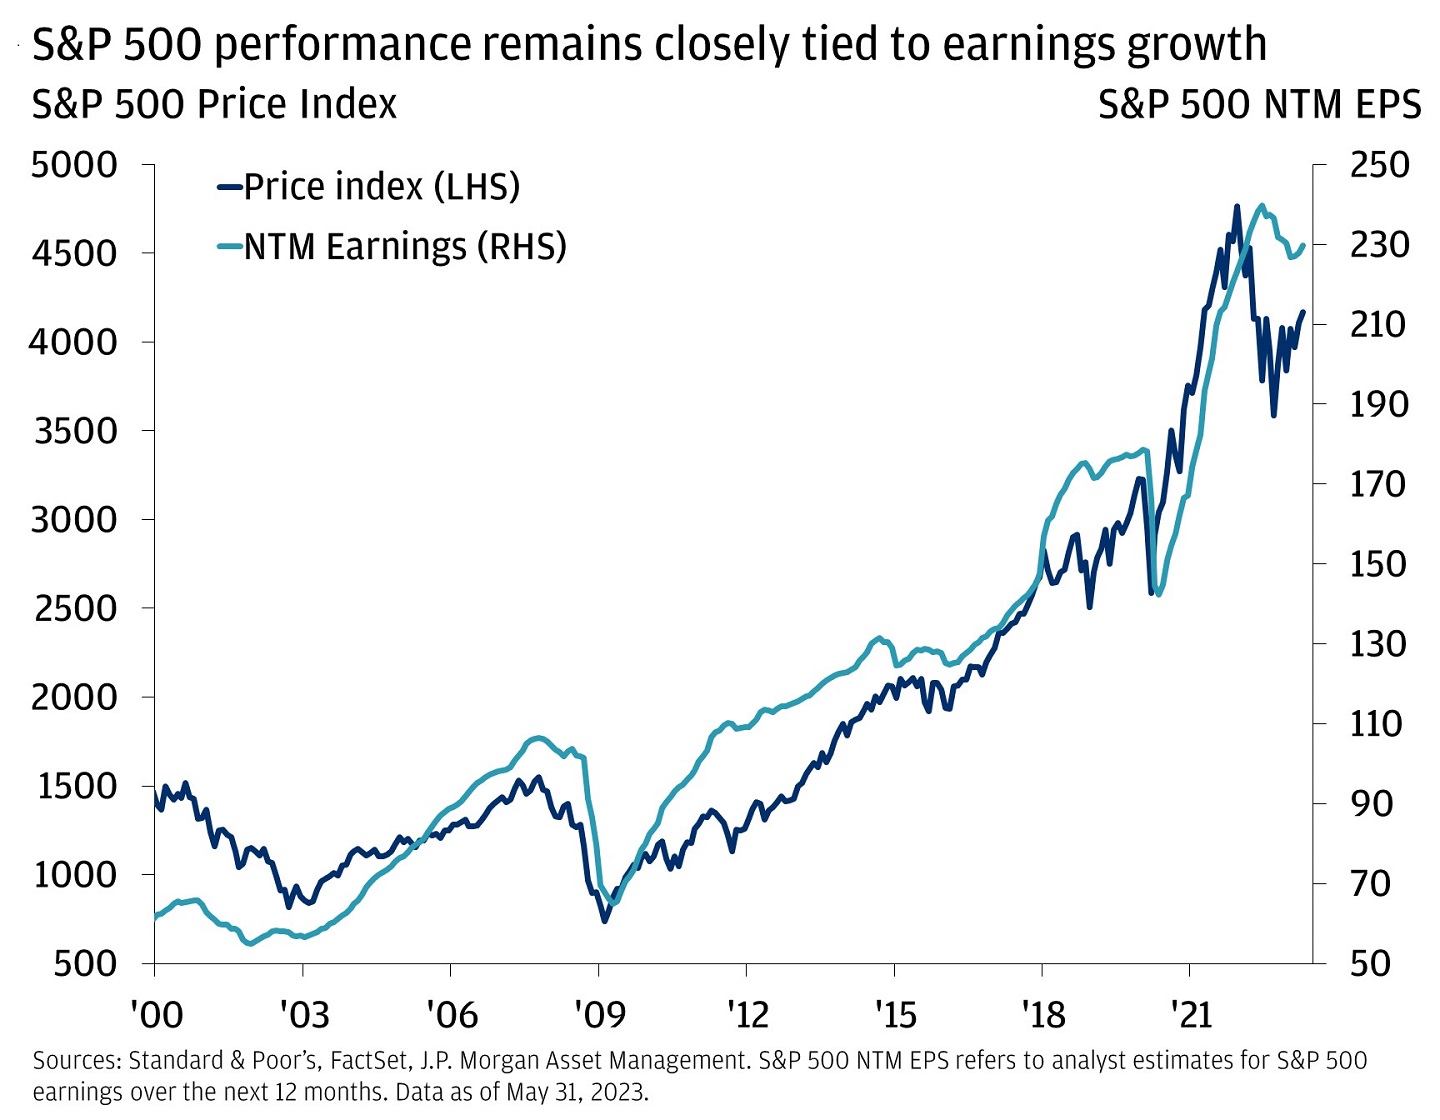 This line chart shows the S&P 500 price index and S&P 500 next-twelve-months earnings per share expectations (NTM earnings).